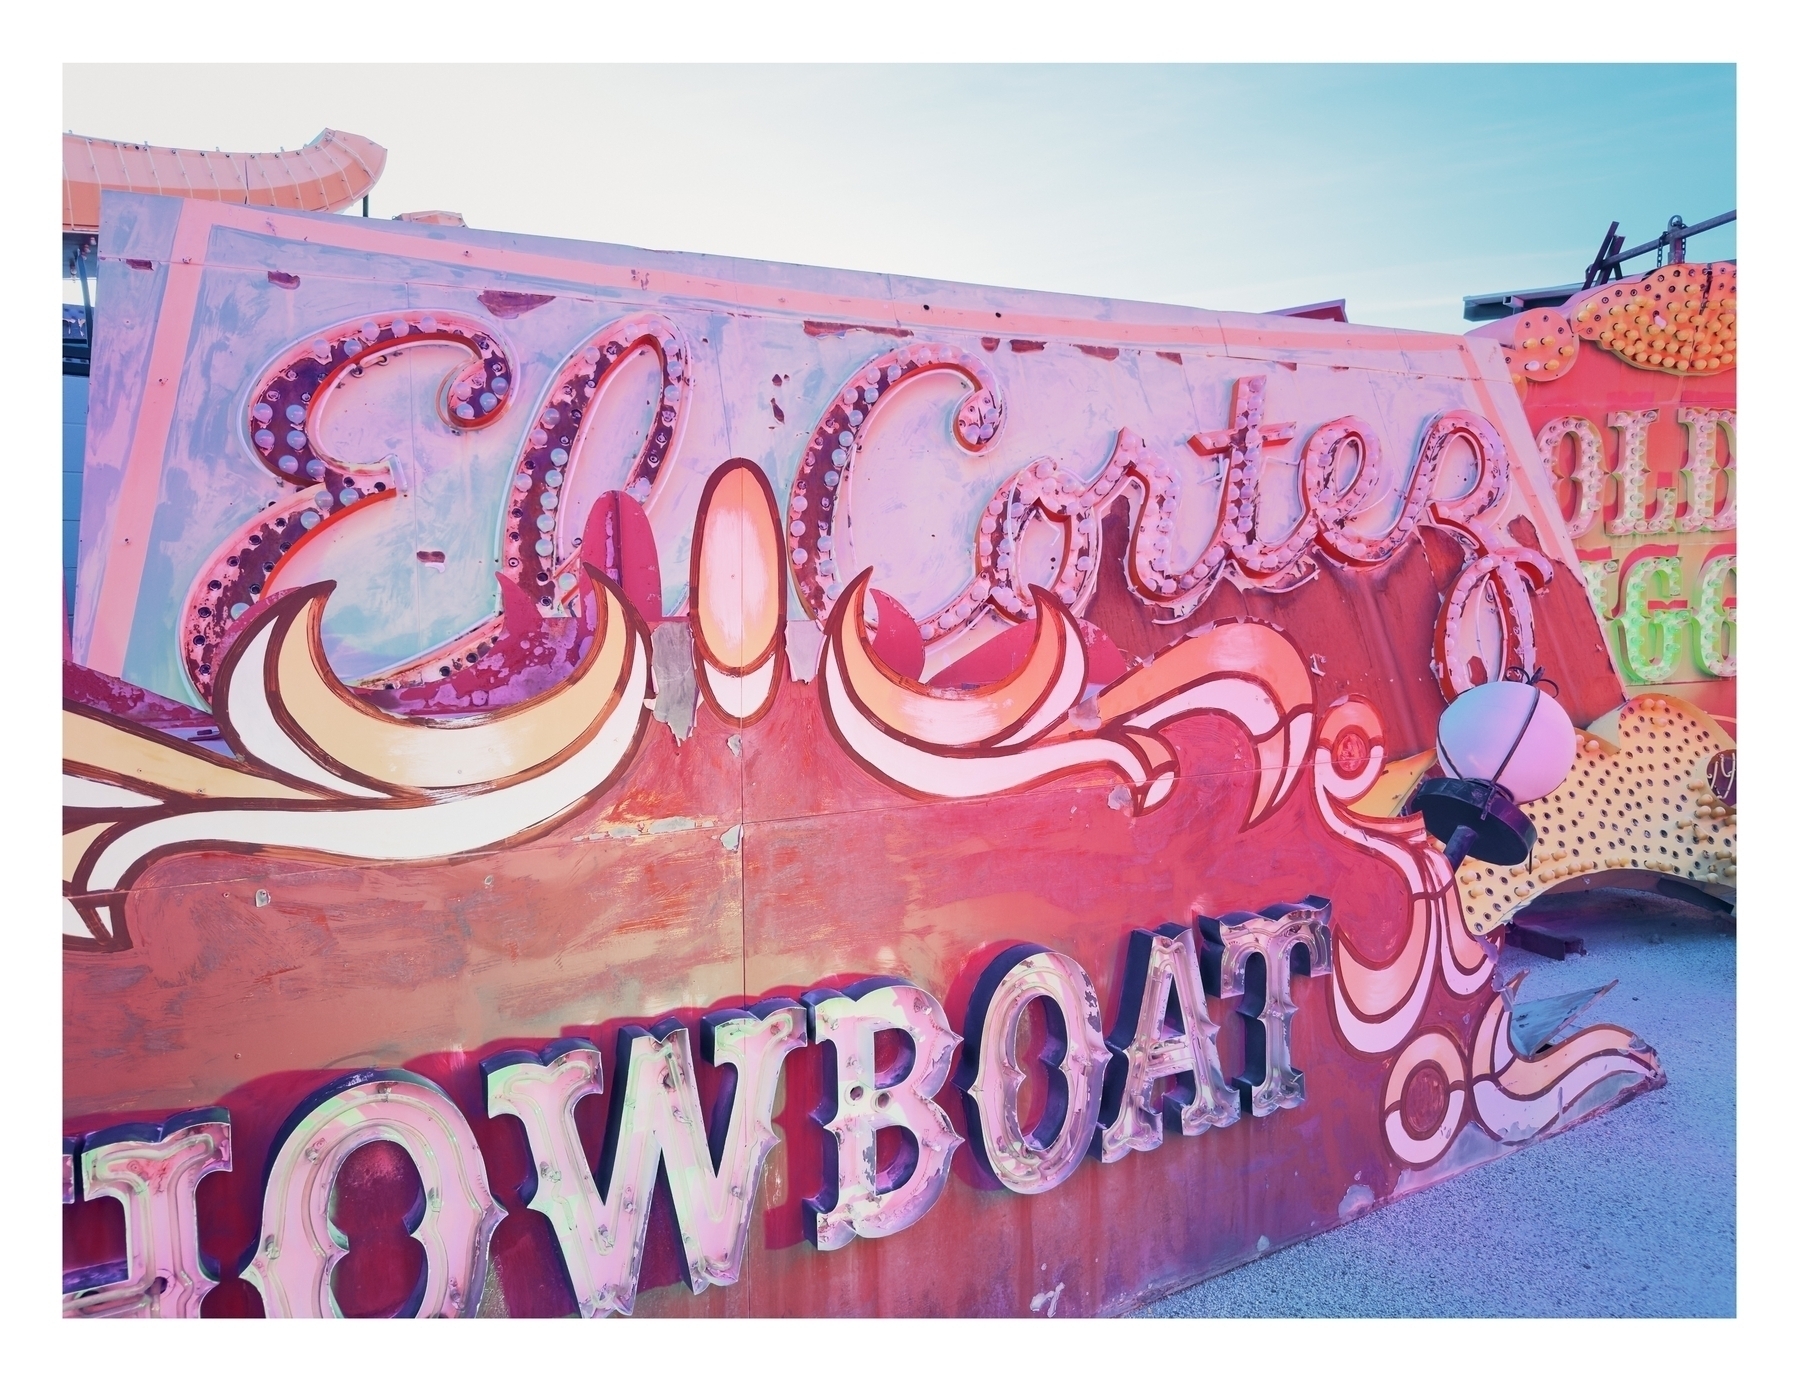 A weathered neon sign reads “El Cortes SHOWBOAT” against a clear sky, suggestive of a vintage establishment or a scrapyard of old signage.